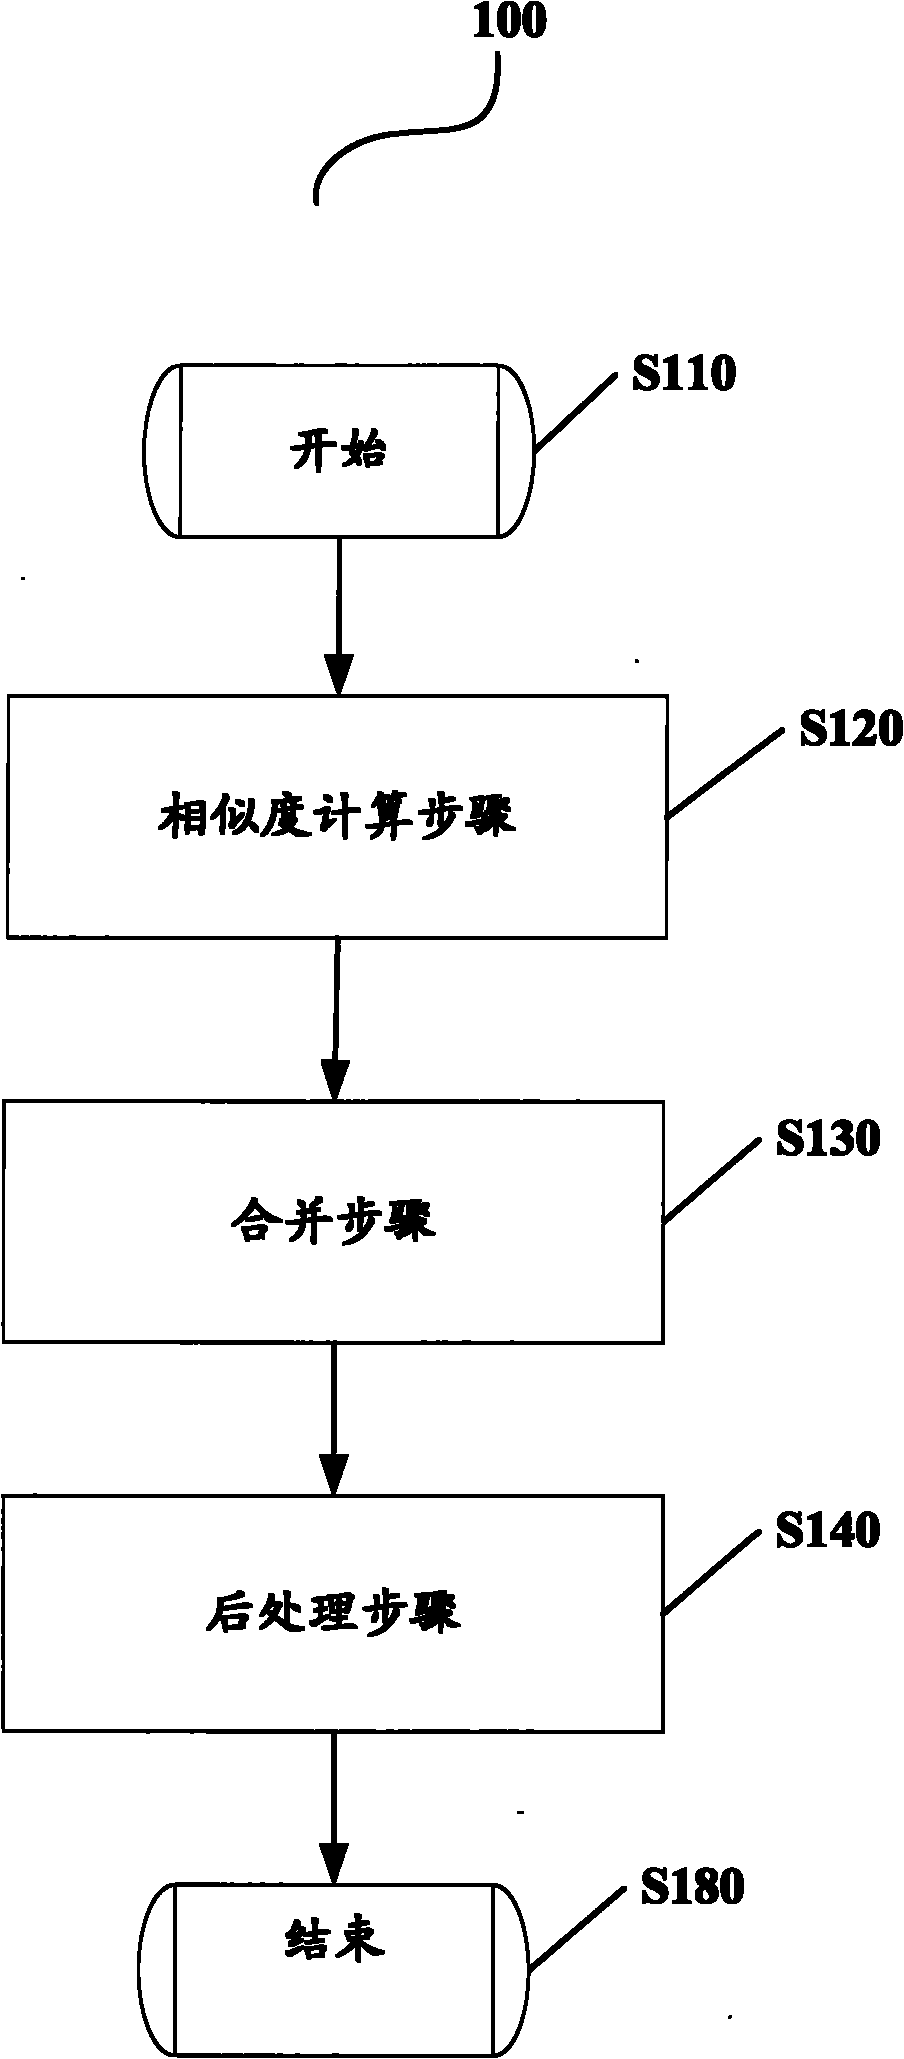 Method and device for forming merge tree for generating document template